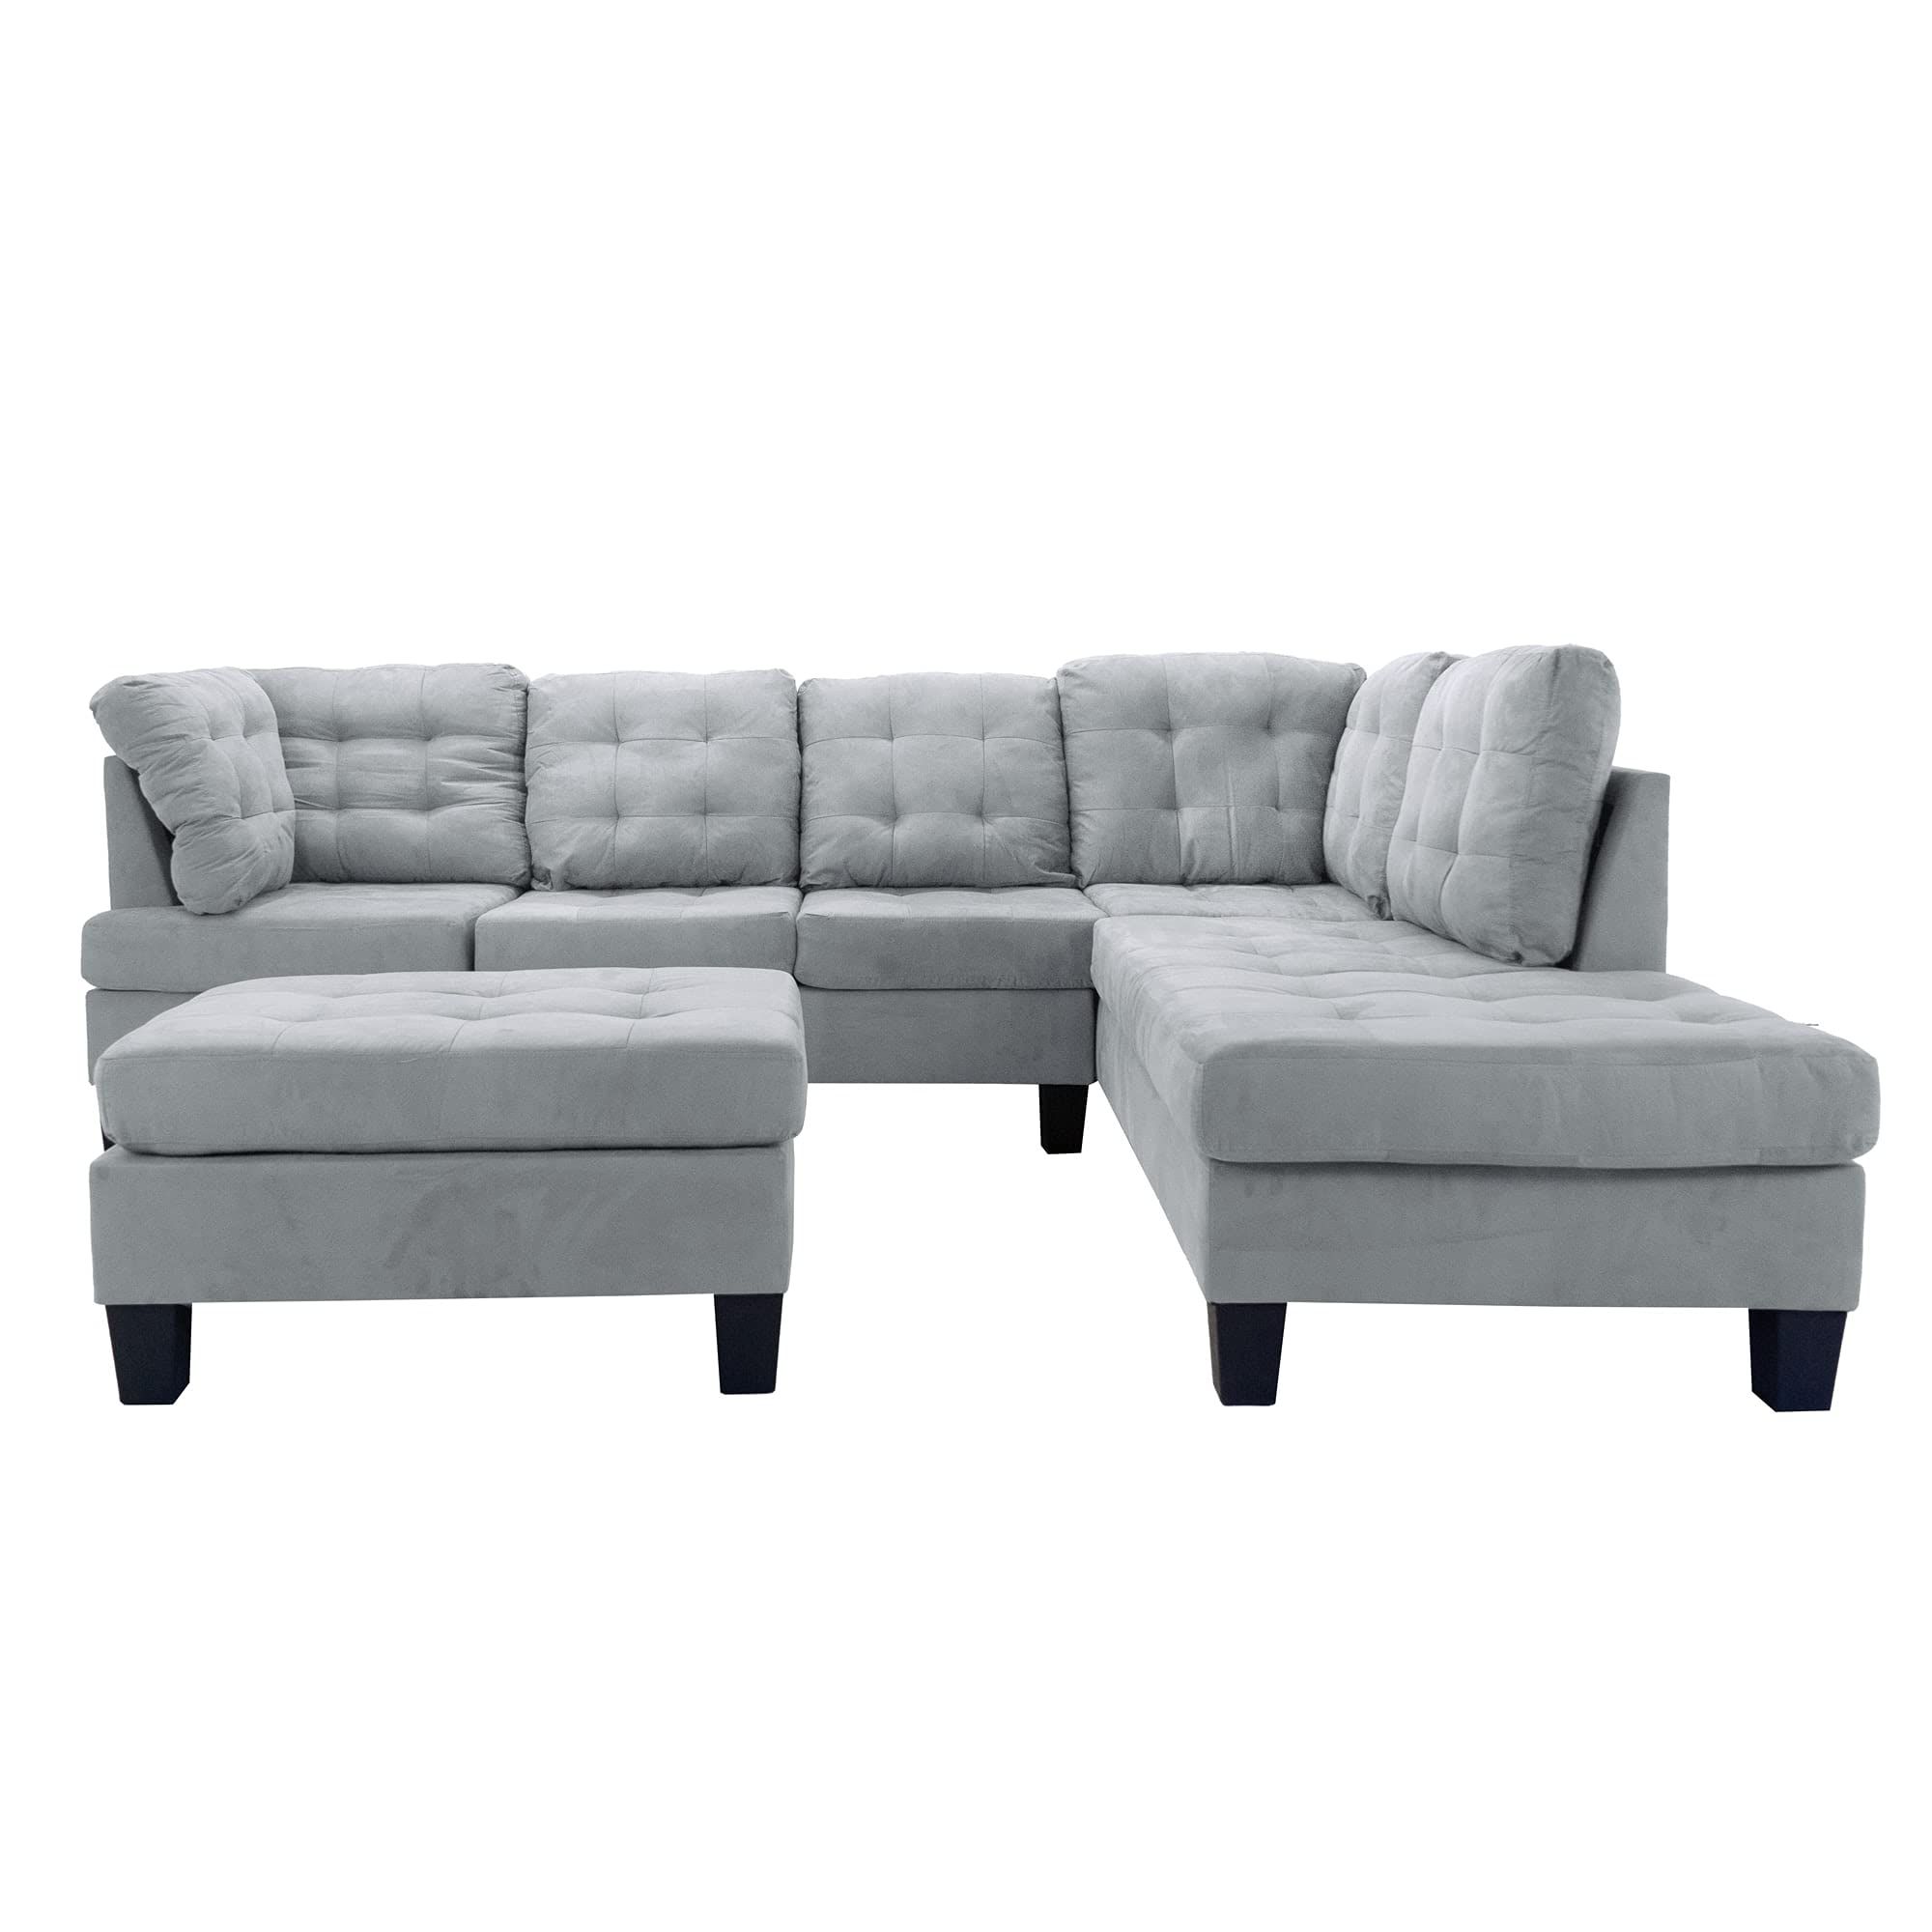 Newest Buy Casa Andrea Milano 3 Piece Modern Tufted Micro Suede L Shaped Regarding L Shape Couches With Reversible Chaises (View 14 of 15)